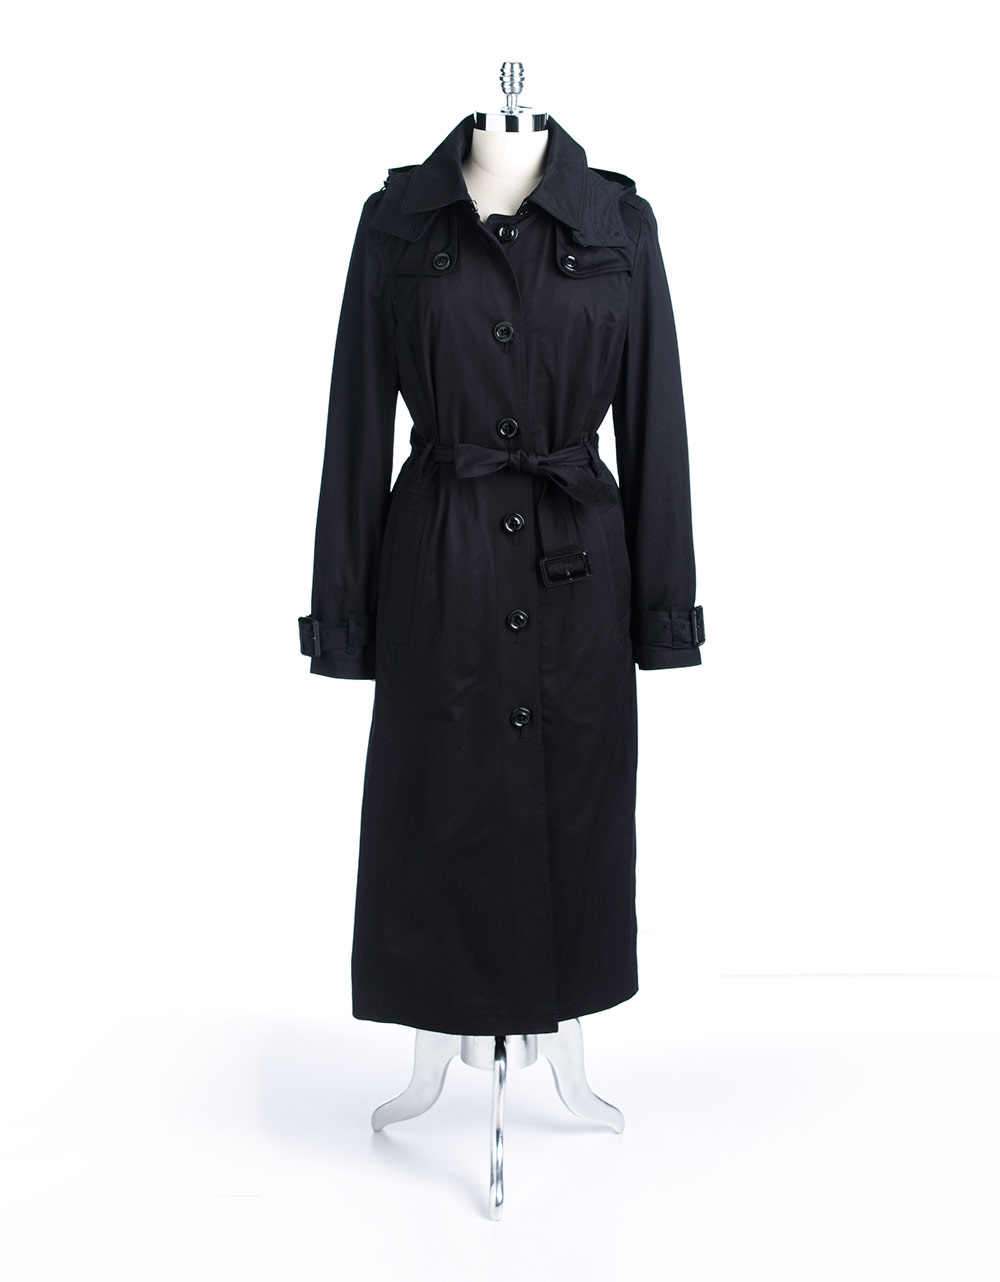 London Fog Hooded Belted Cotton Trench Coat in Black | Lyst